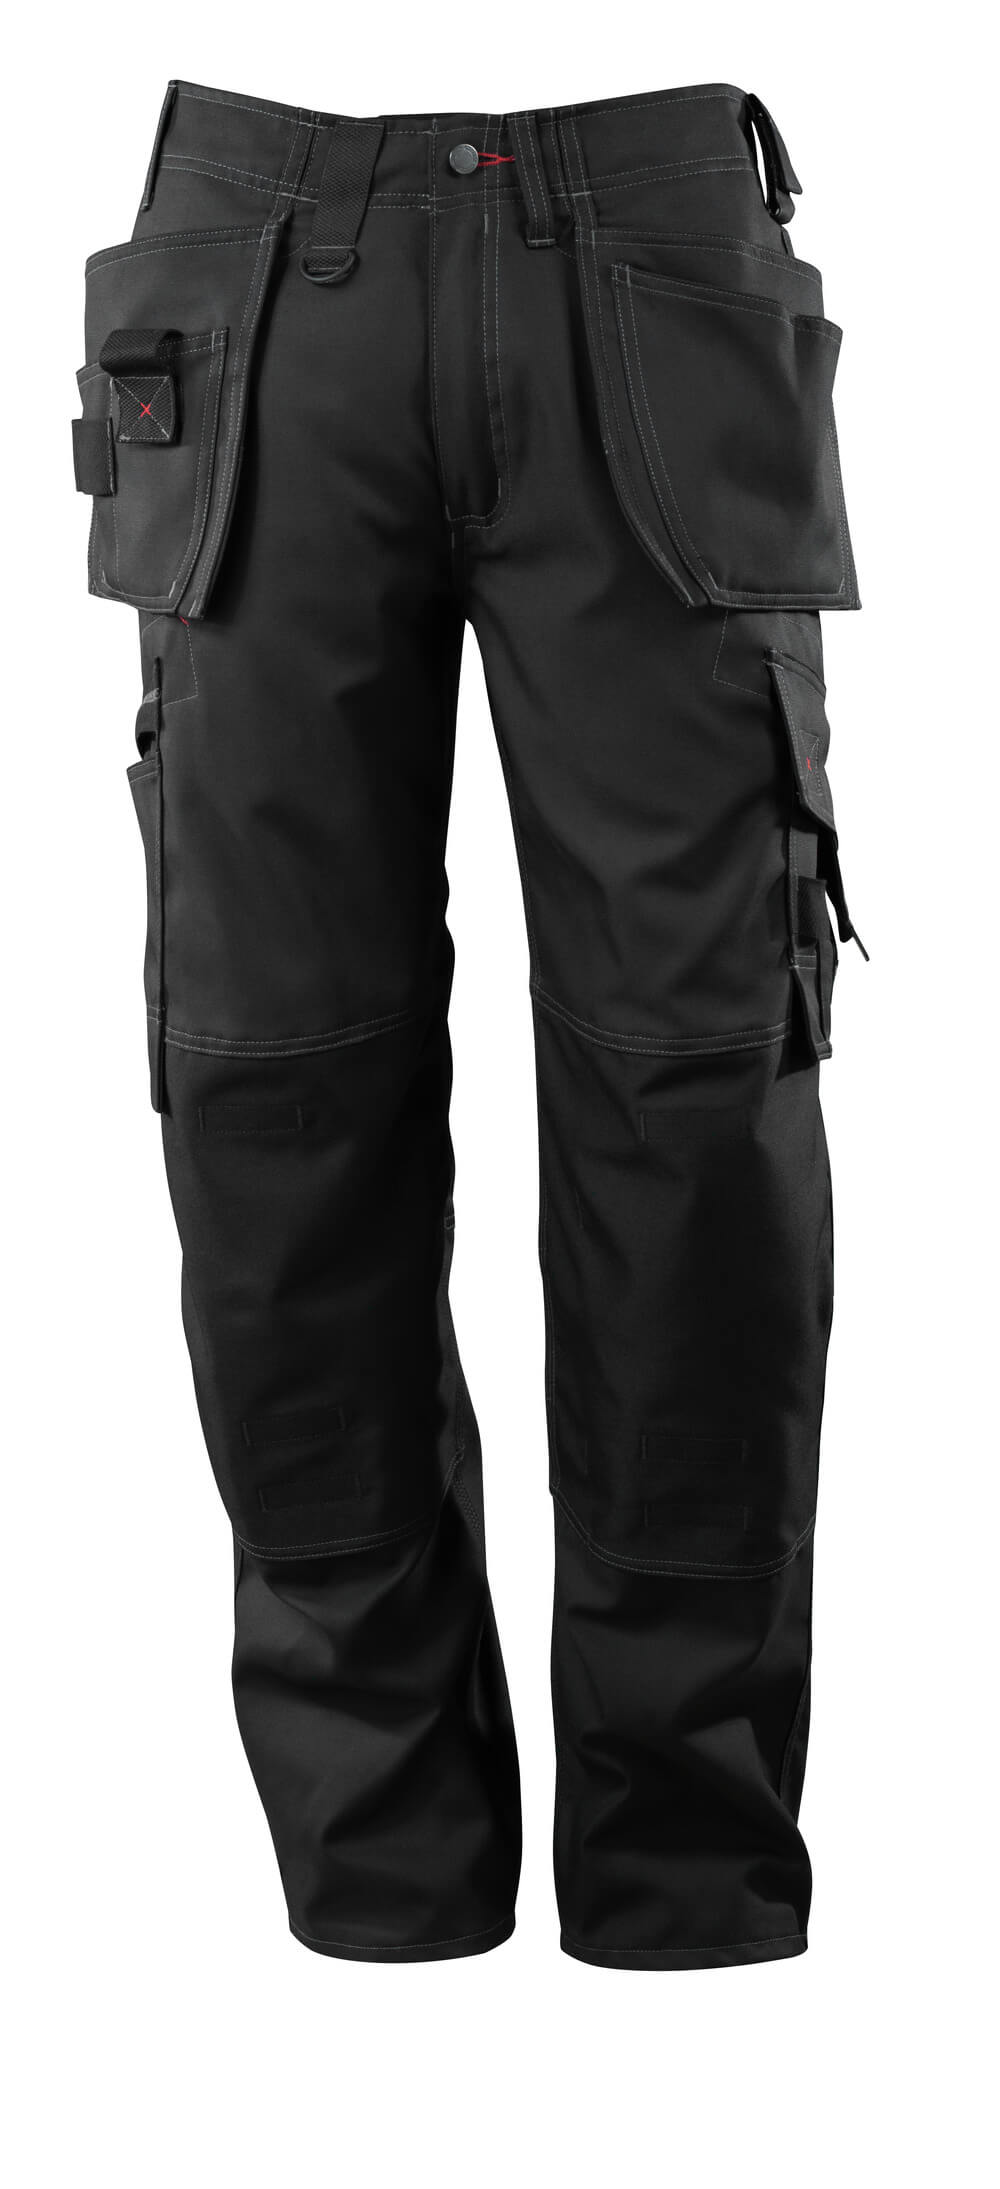 Mascot FRONTLINE  Lindos Trousers with holster pockets 07379 black